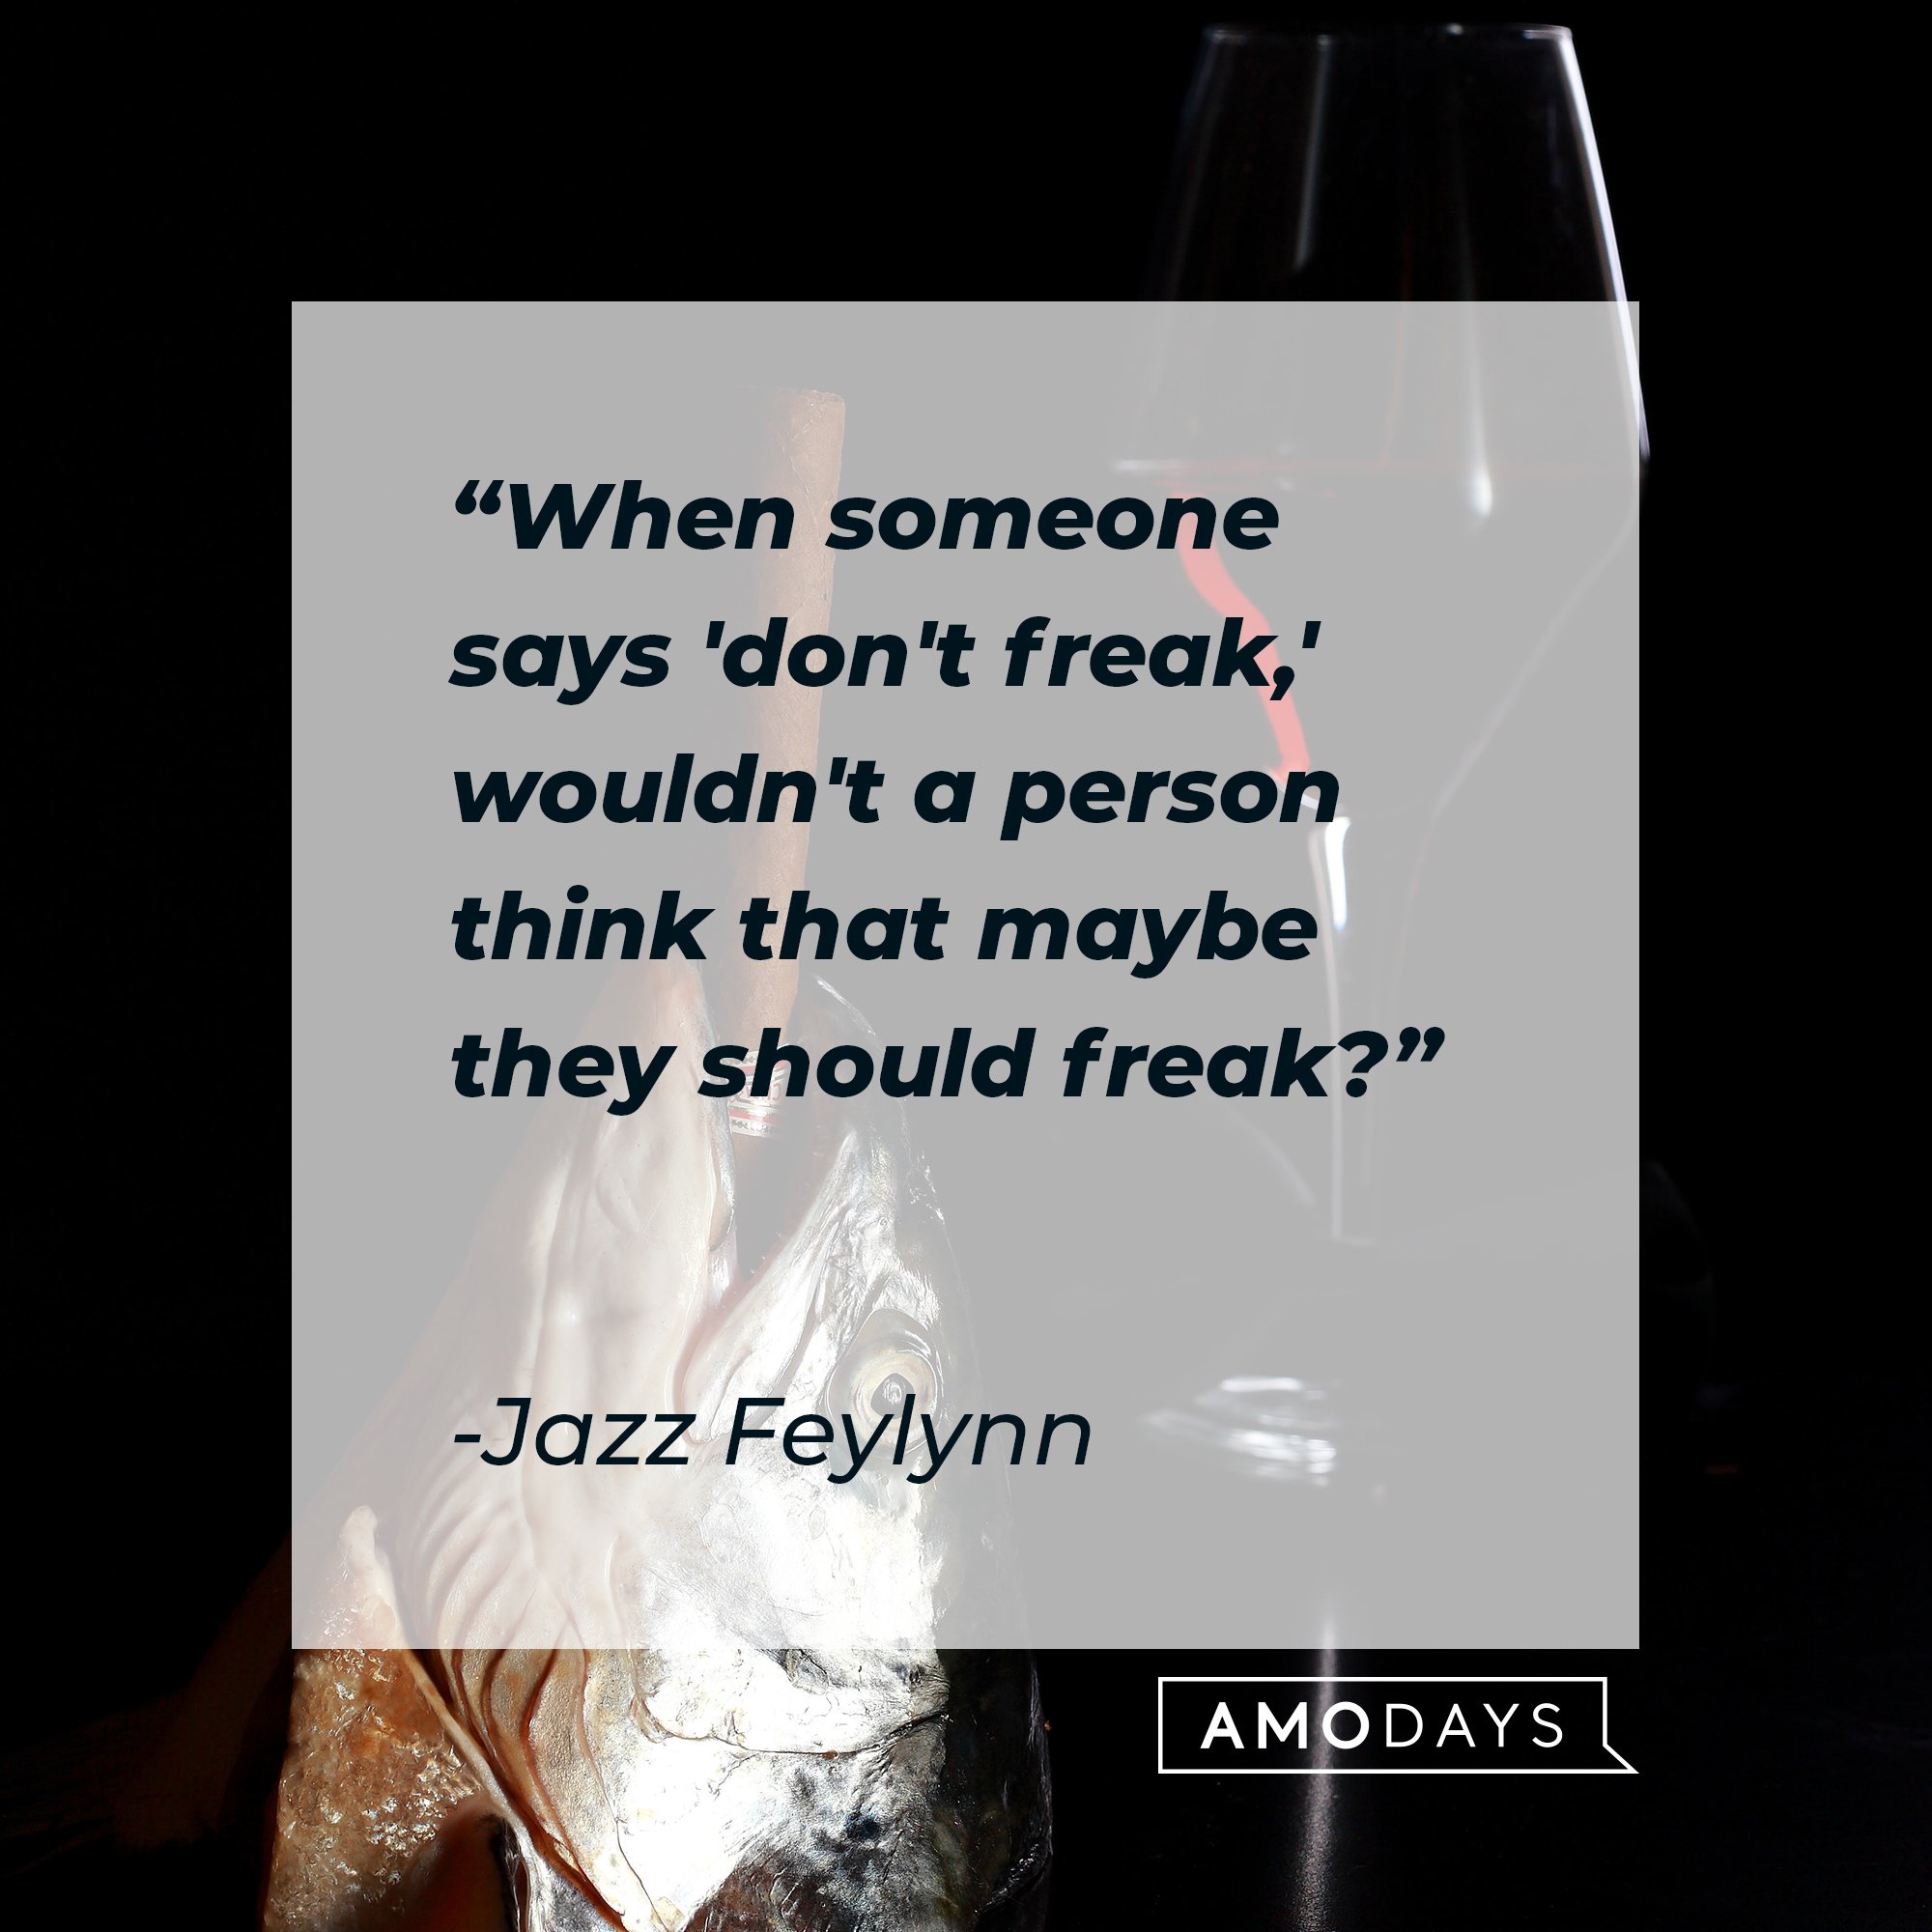 Jazz Feylynn’s quote: "When someone says 'don't freak,' wouldn't a person think that maybe they should freak?" | Image: AmoDays